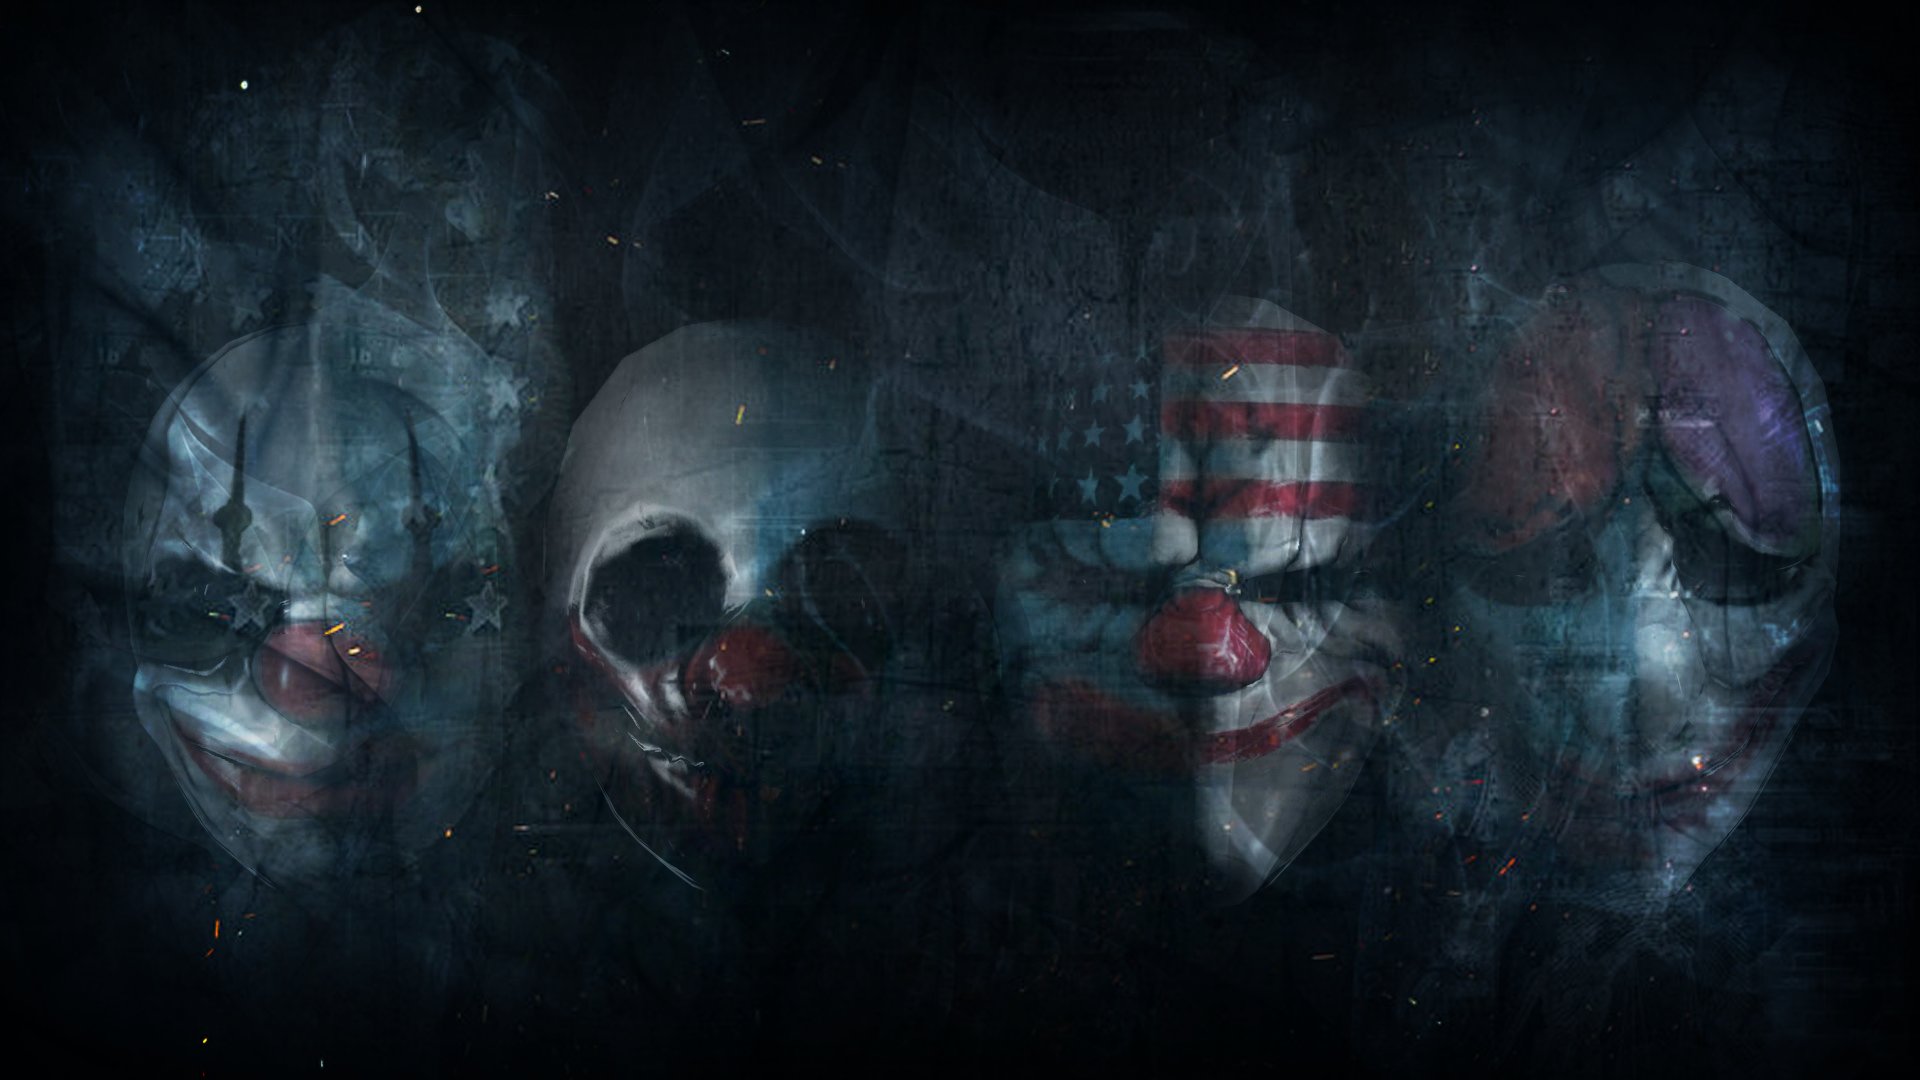 payday 2 pc download free